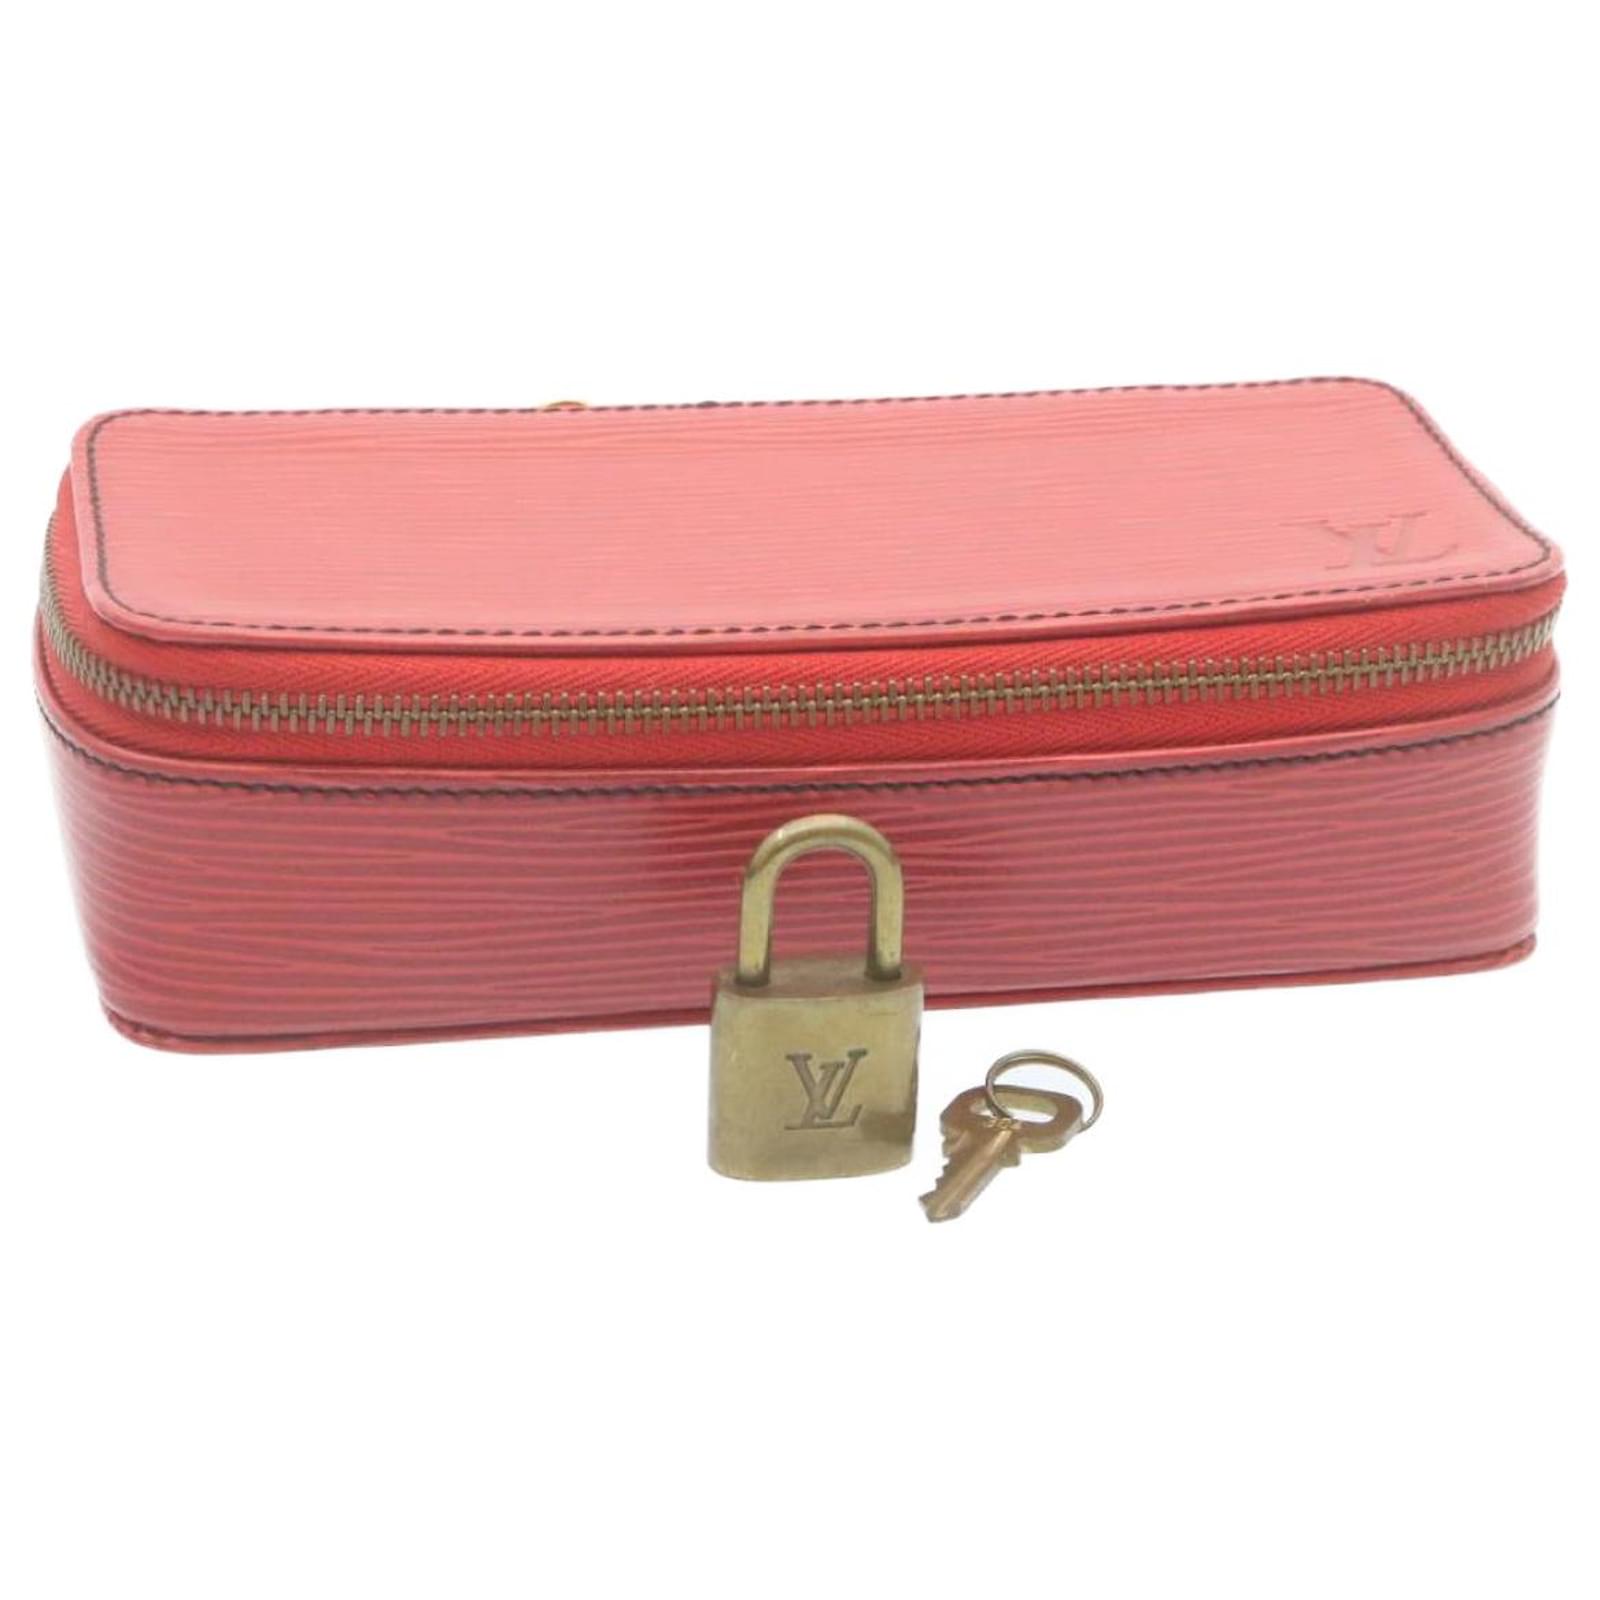 LOUIS VUITTON Epi Jewelry Box Red LV Auth 28938 Leather ref.533161